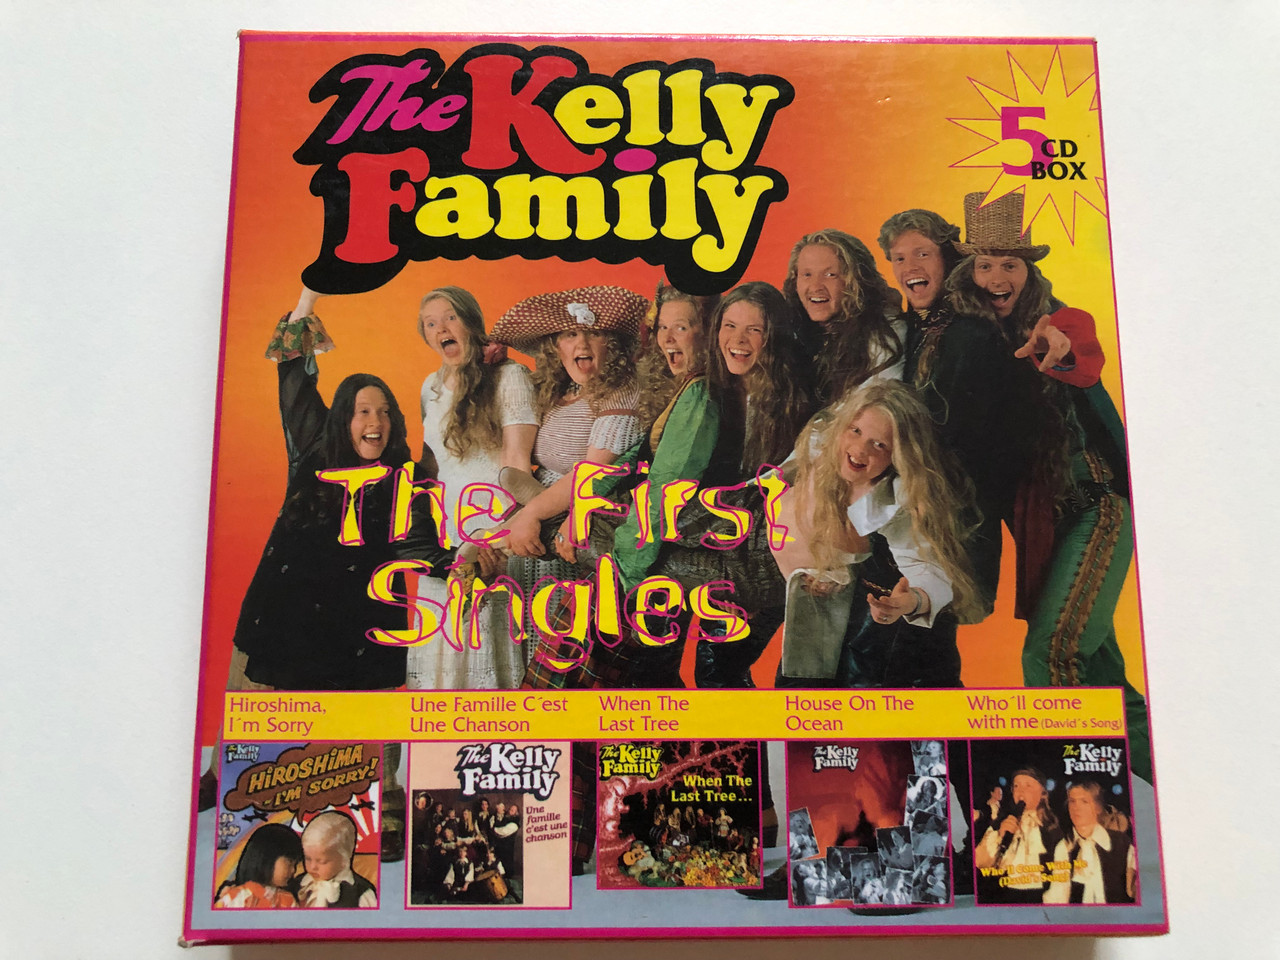 https://cdn10.bigcommerce.com/s-62bdpkt7pb/products/30804/images/181857/The_Kelly_Family_The_First_Singles_Hiroshima_Im_Sorry_Une_Famille_Cest_Une_Chanson_When_The_Last_Tree..._House_On_The_Ocean_Wholl_Come_With_Me_Davids_Song_Kel-Life_5x_Audio_CD_1_1__71303.1623935890.1280.1280.JPG?c=2